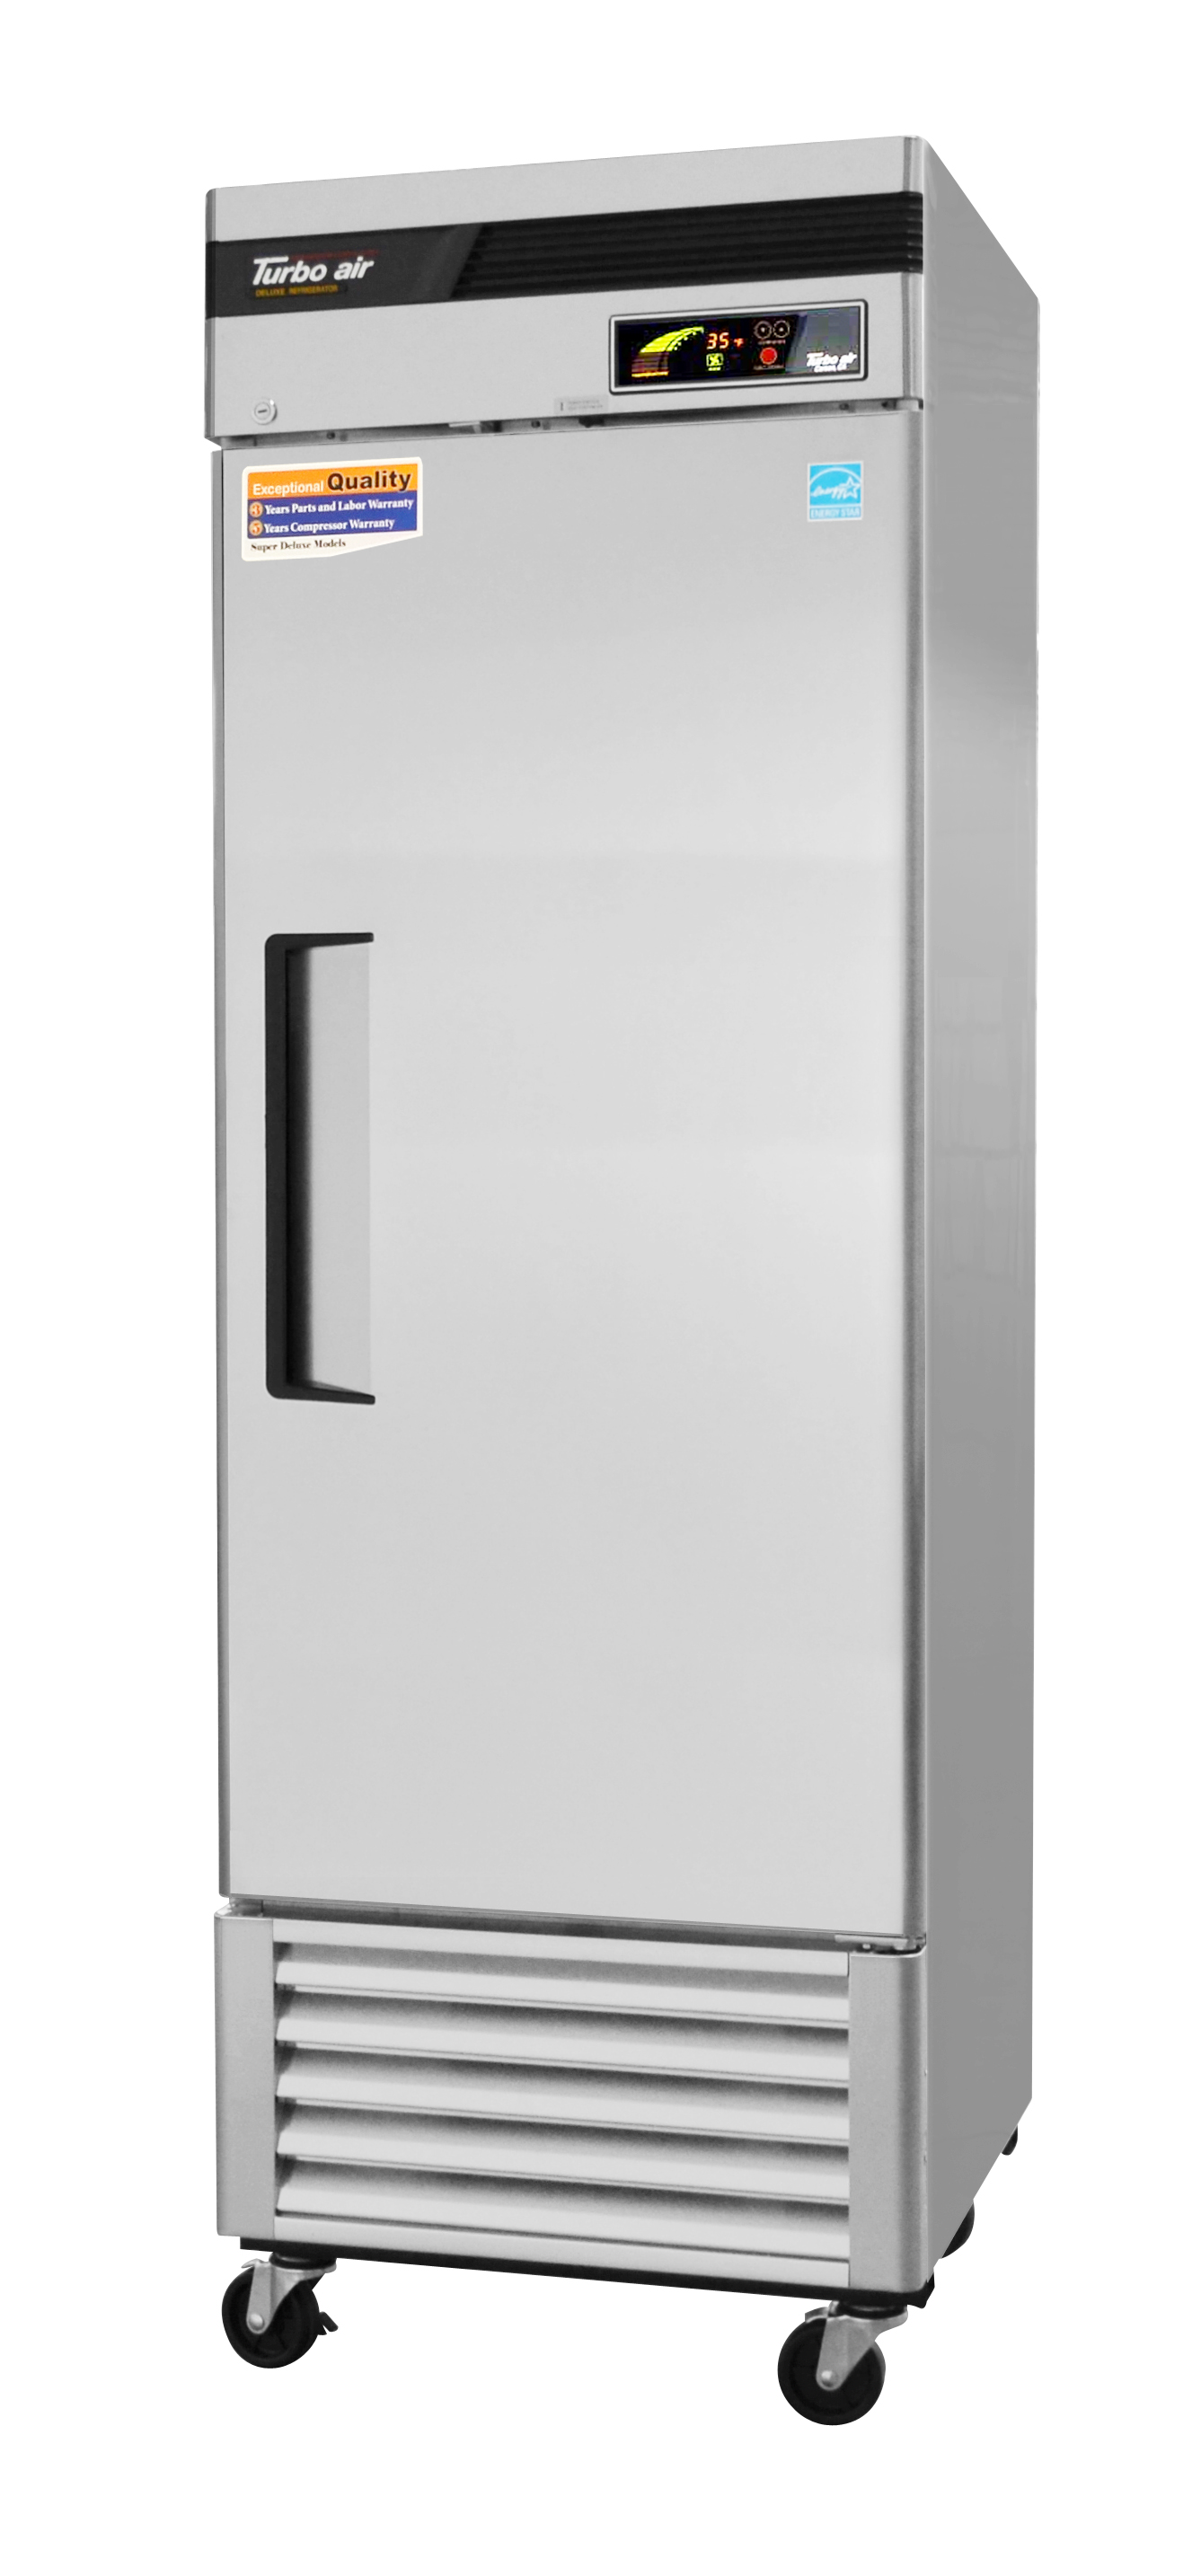 Super Deluxe Refrigerator, reach-in, one-section